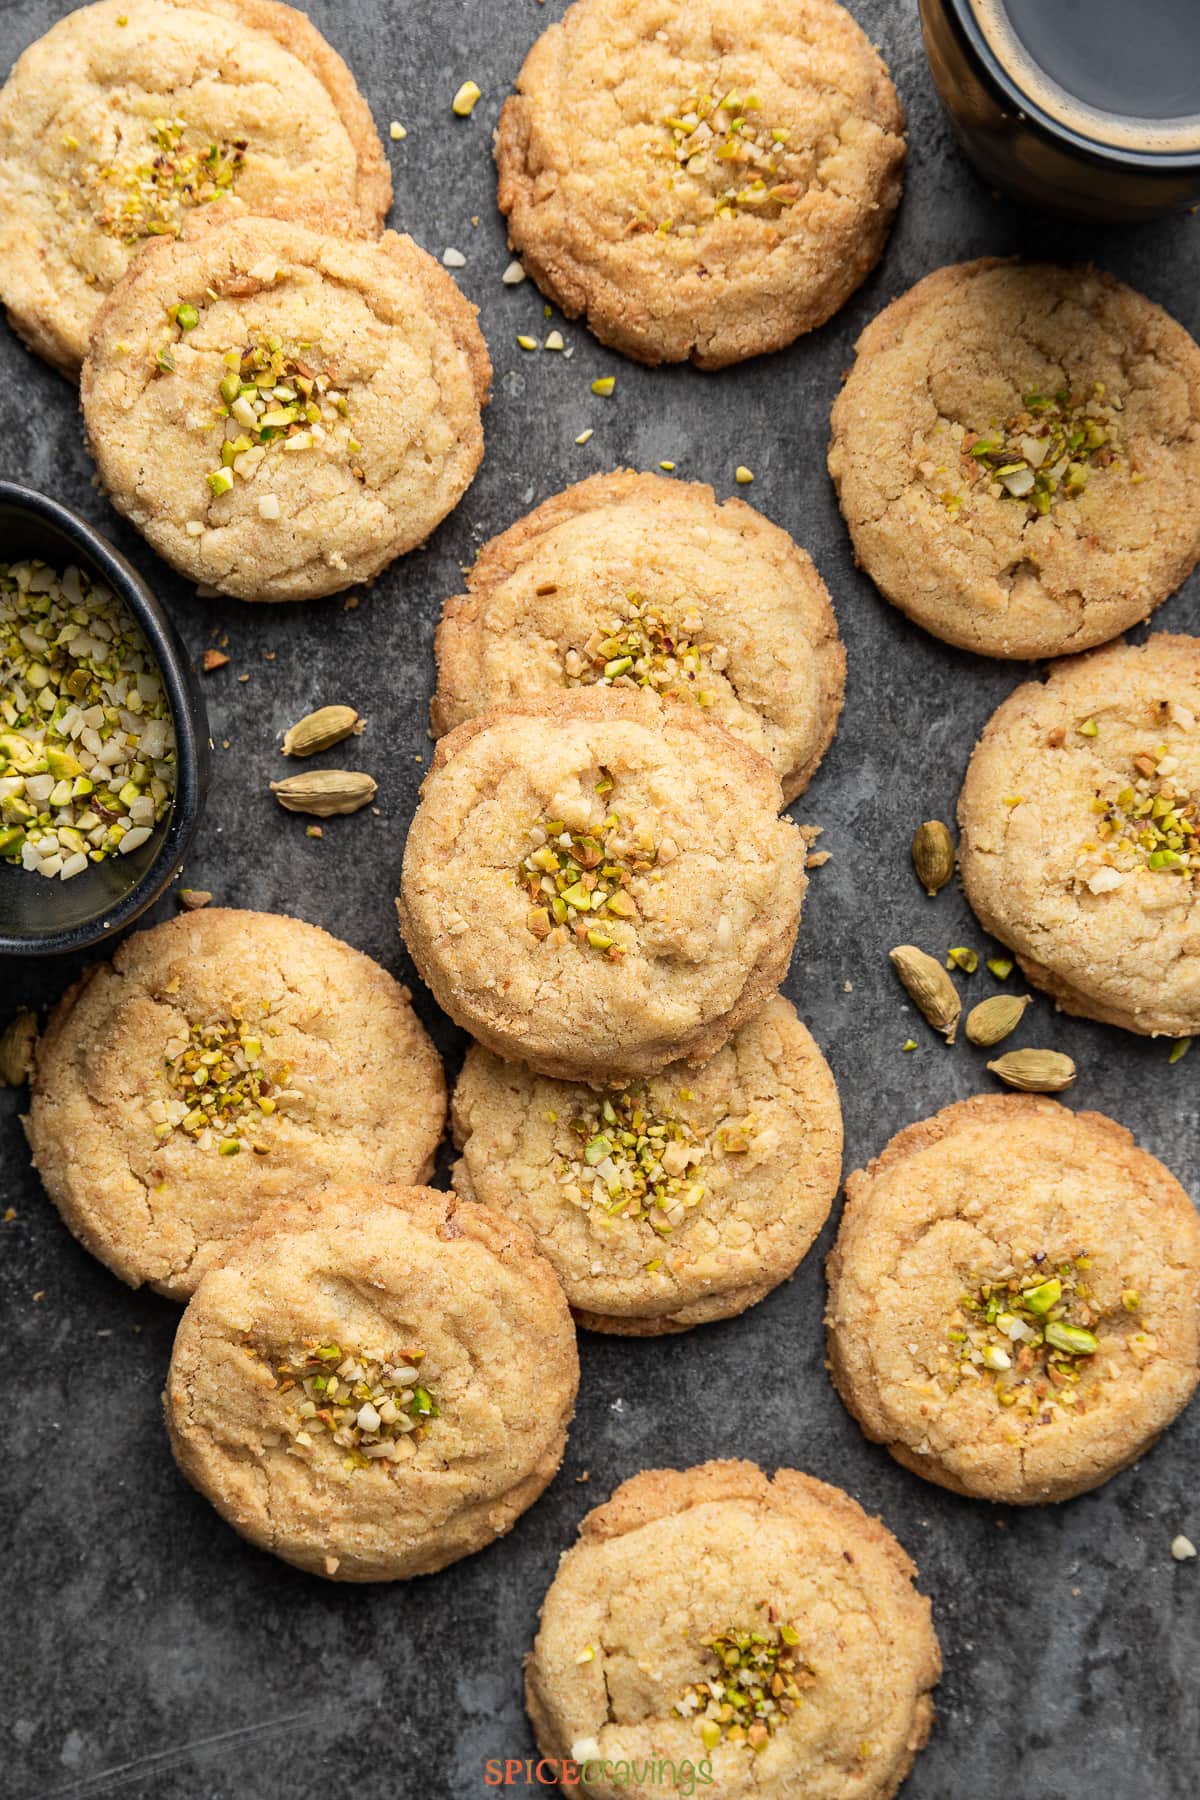 nankhatai cookies garnished with chopped almond and pistachios on black slate